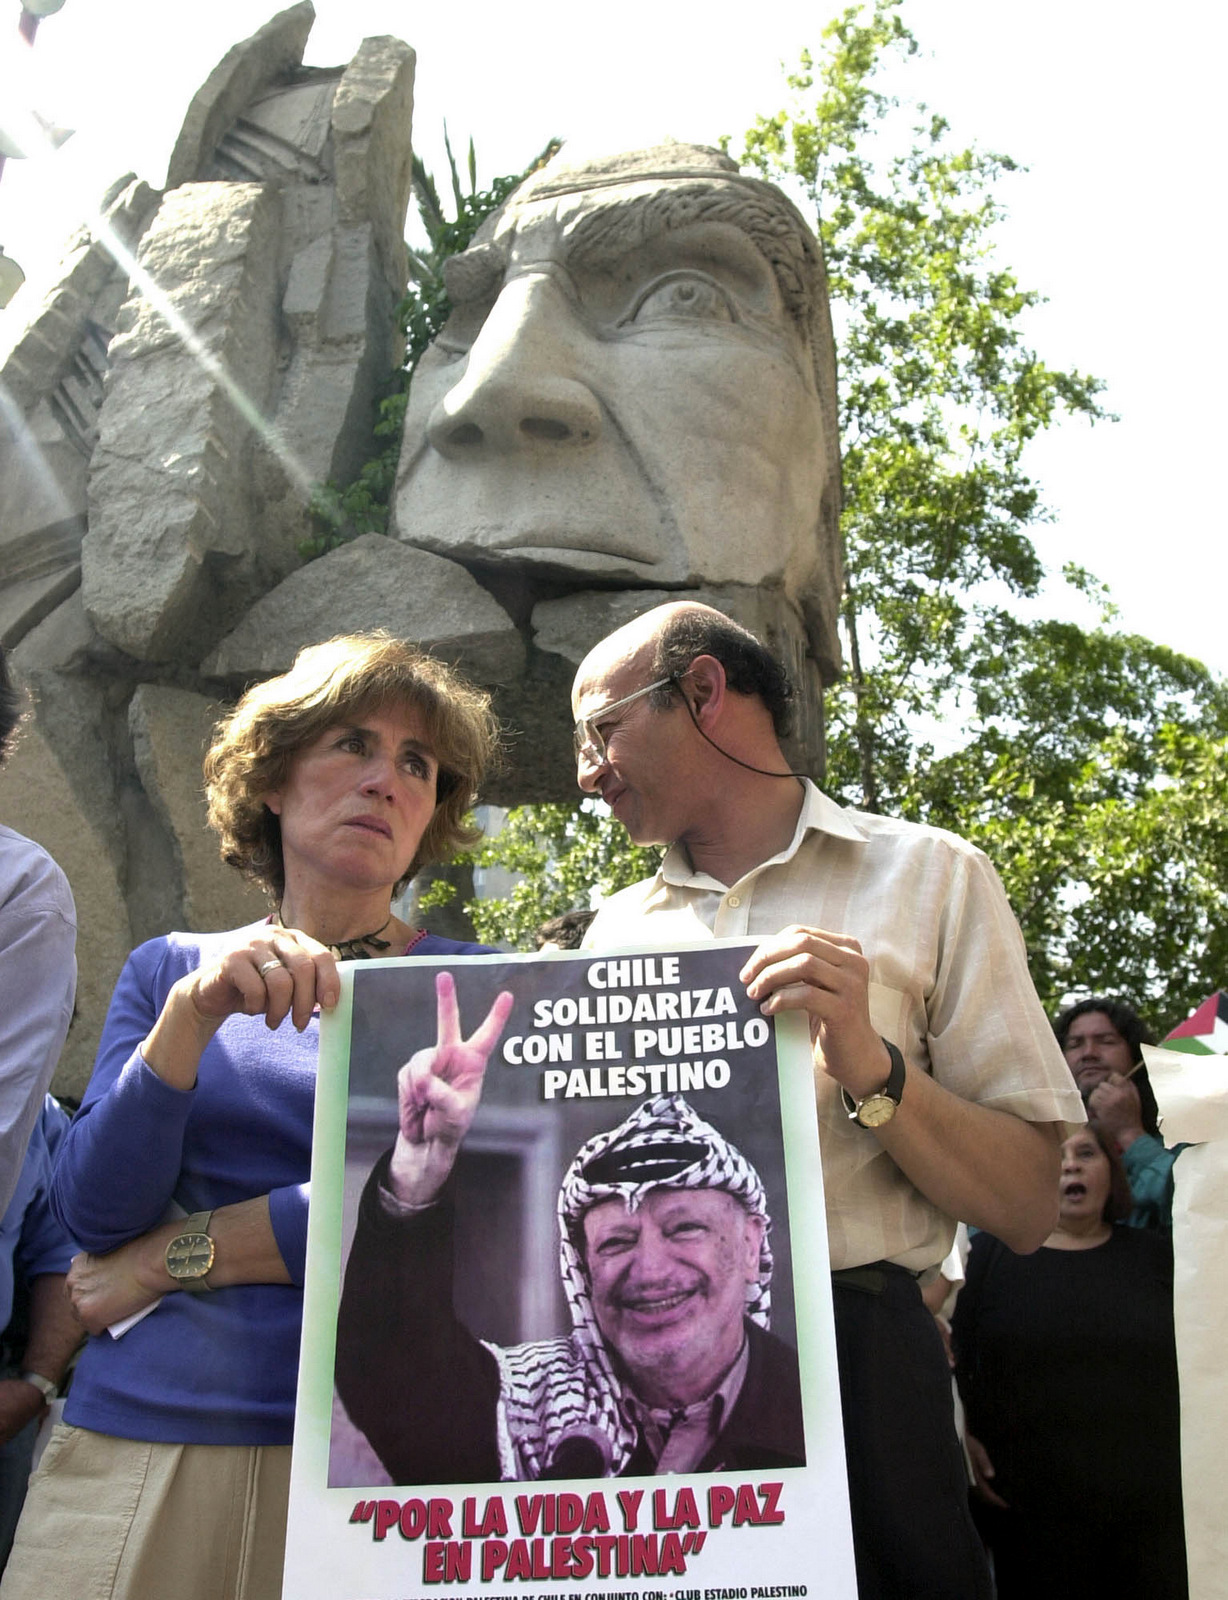 Gladys Marin, participtes in a peaceful protest in support of the Palestinian people in Santiago, Chile, April 3, 2002. The poster reads "Chile is in Solidarity with the Palestinian People," and "For Life and Peace in Palestine." In the background a monument is seen of a Chilean Indian. (AP/Santiago Llanquin)